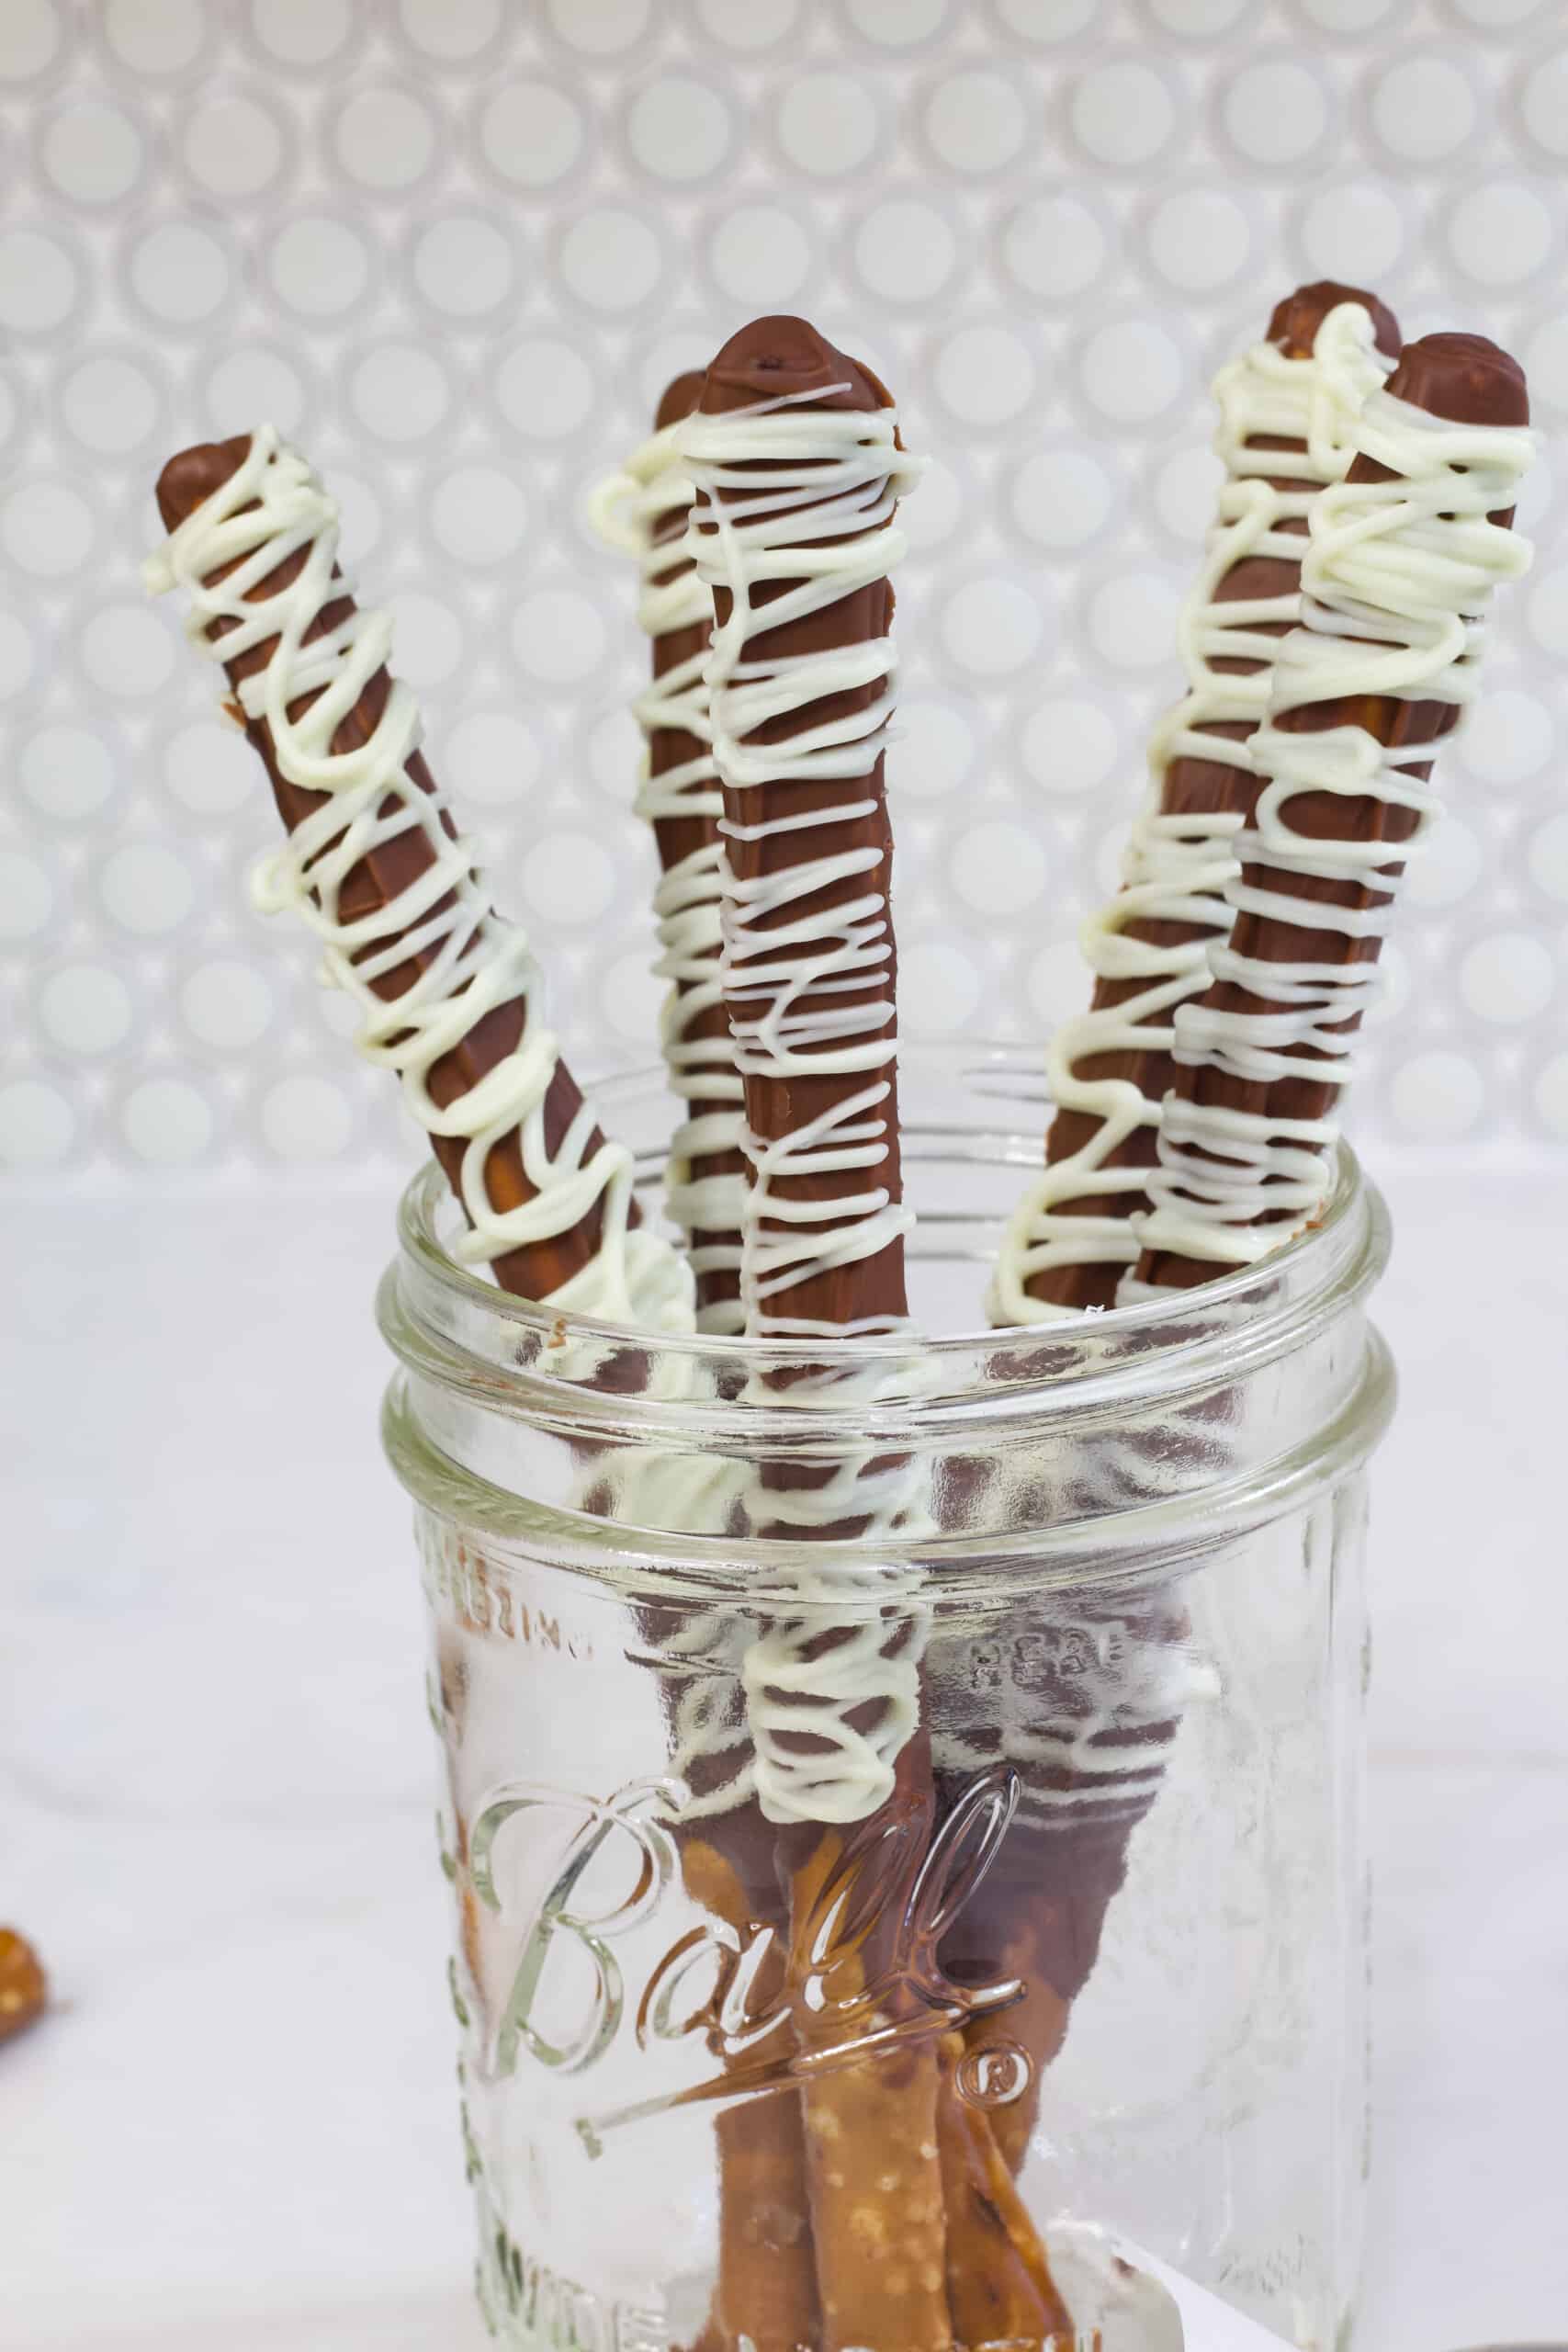 Five pretzel rods that have been dipped in milk chocolate and drizzled with white chocolate in a mason jar.